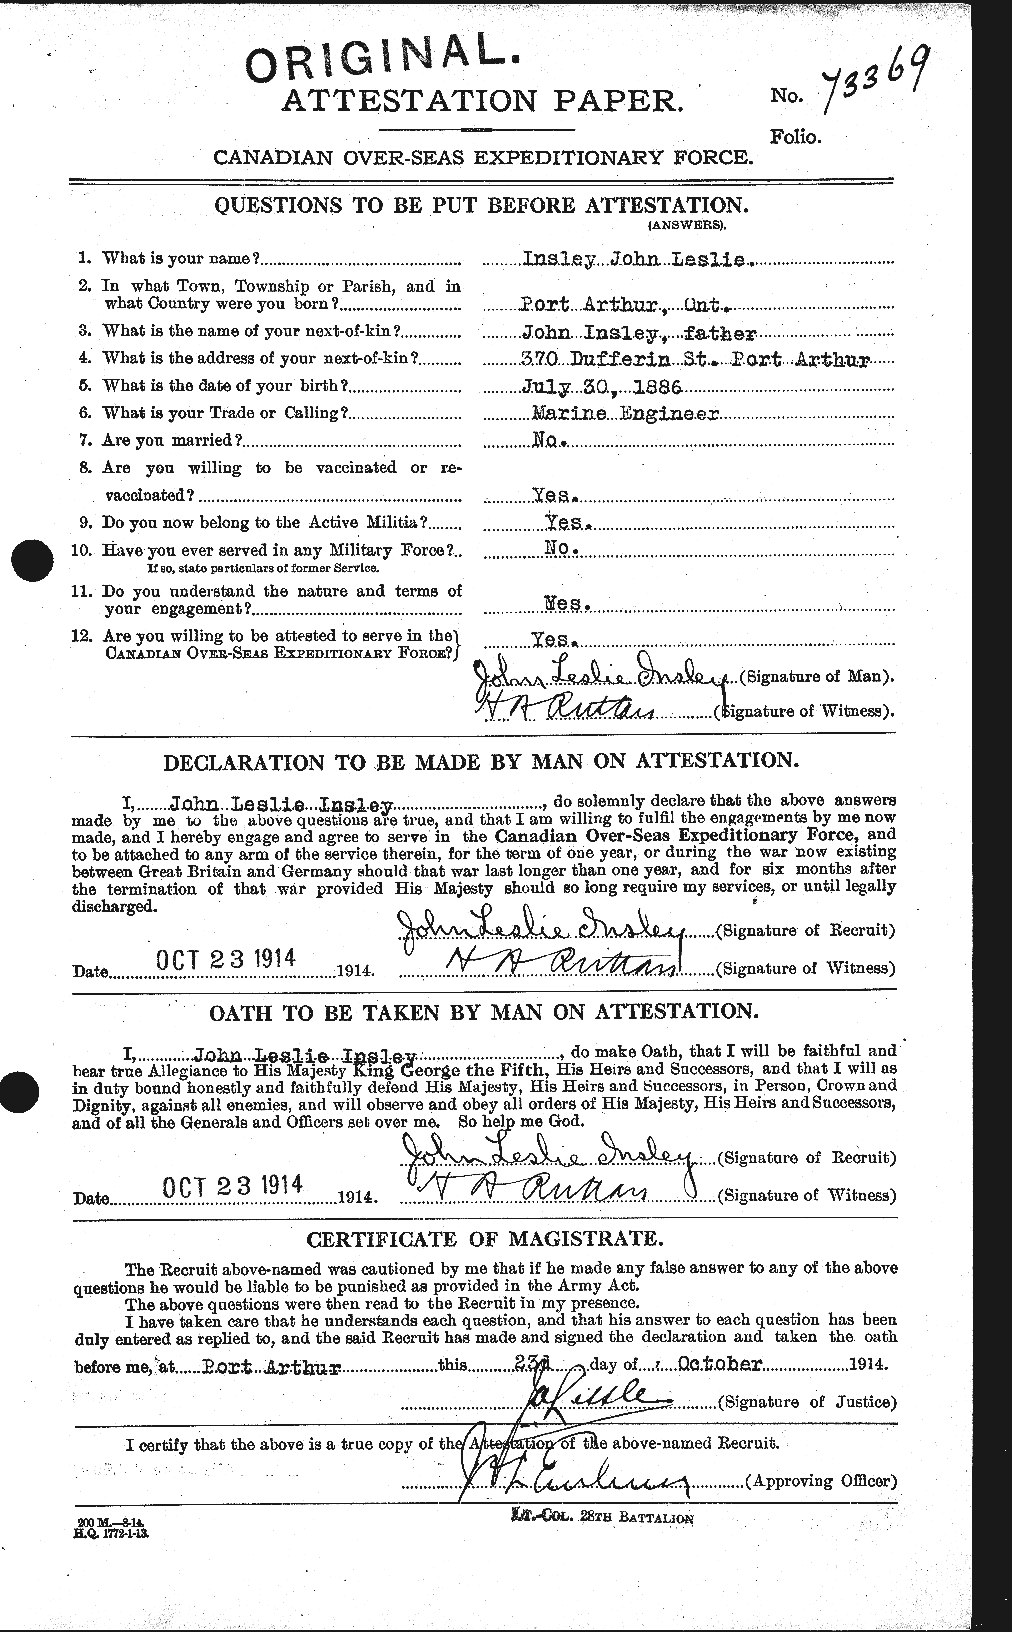 Personnel Records of the First World War - CEF 415526a